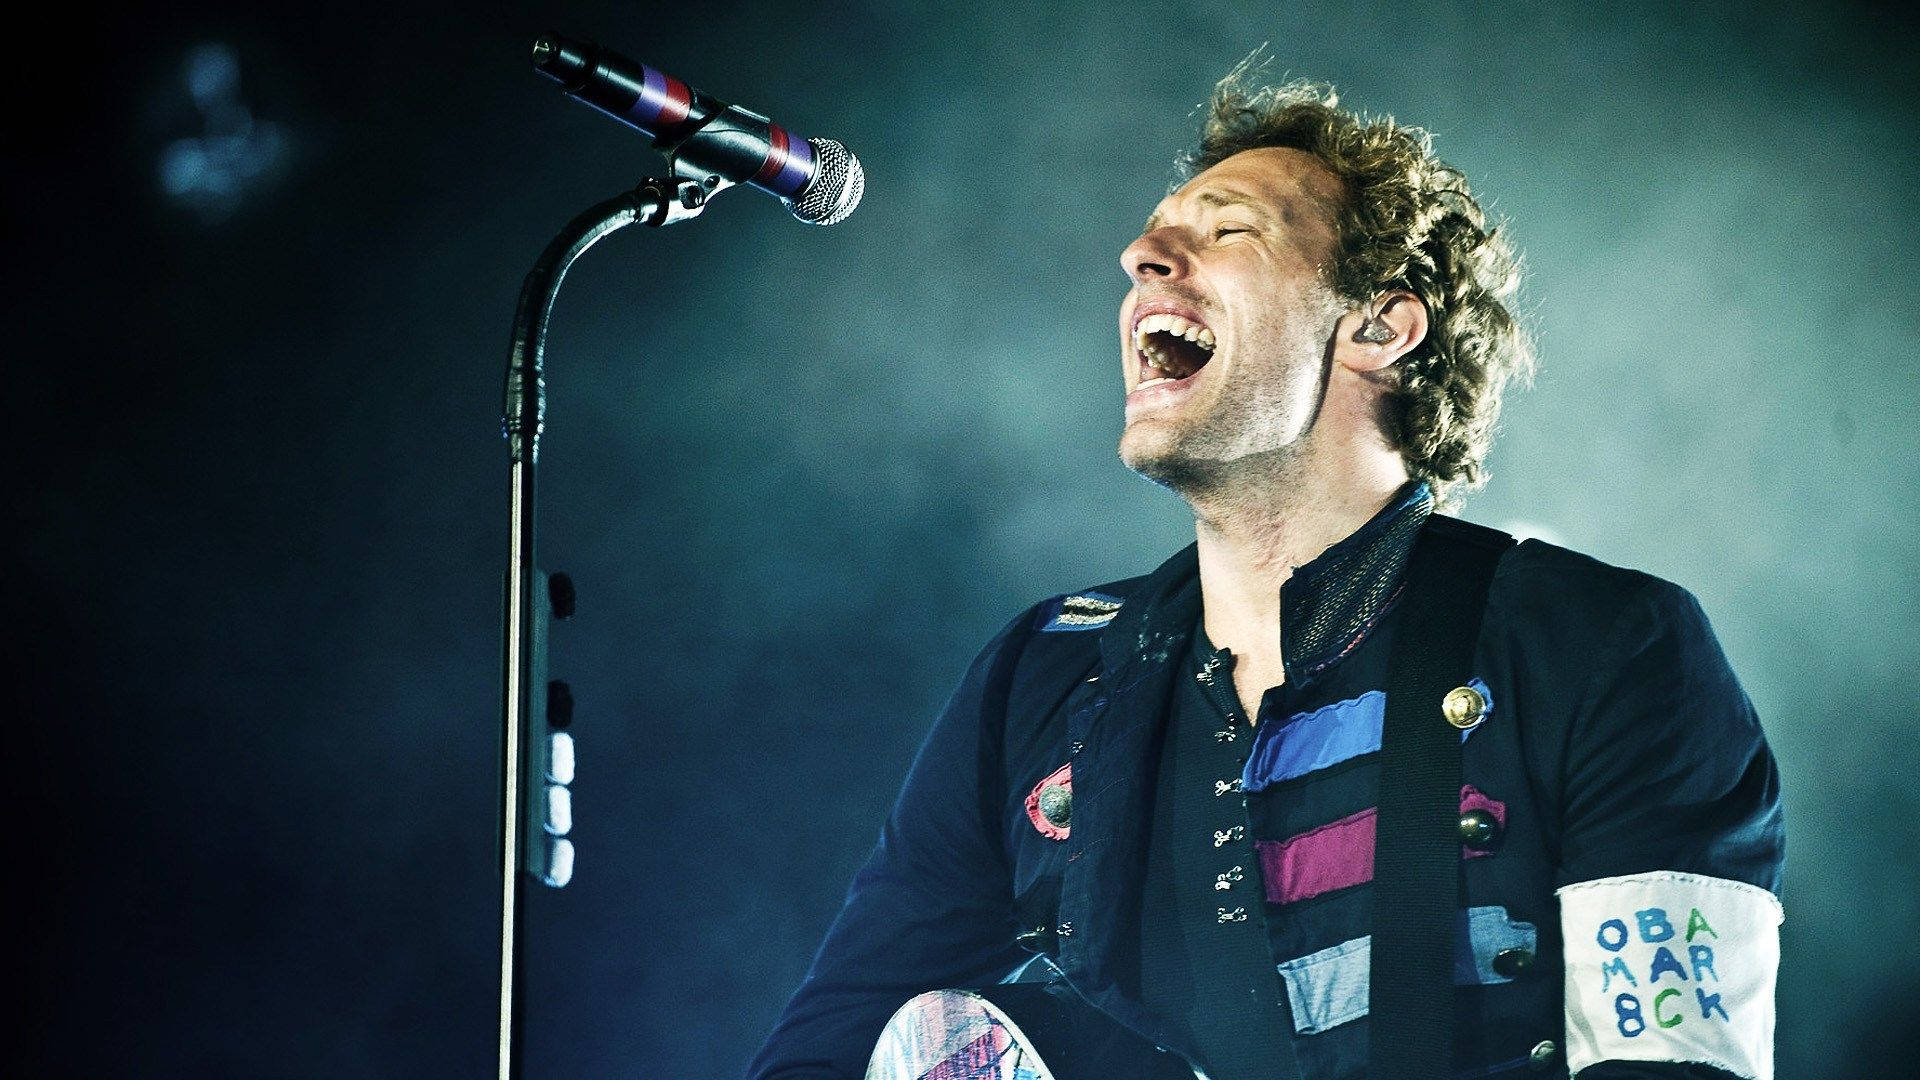 Chris Martin Coldplay Live Background